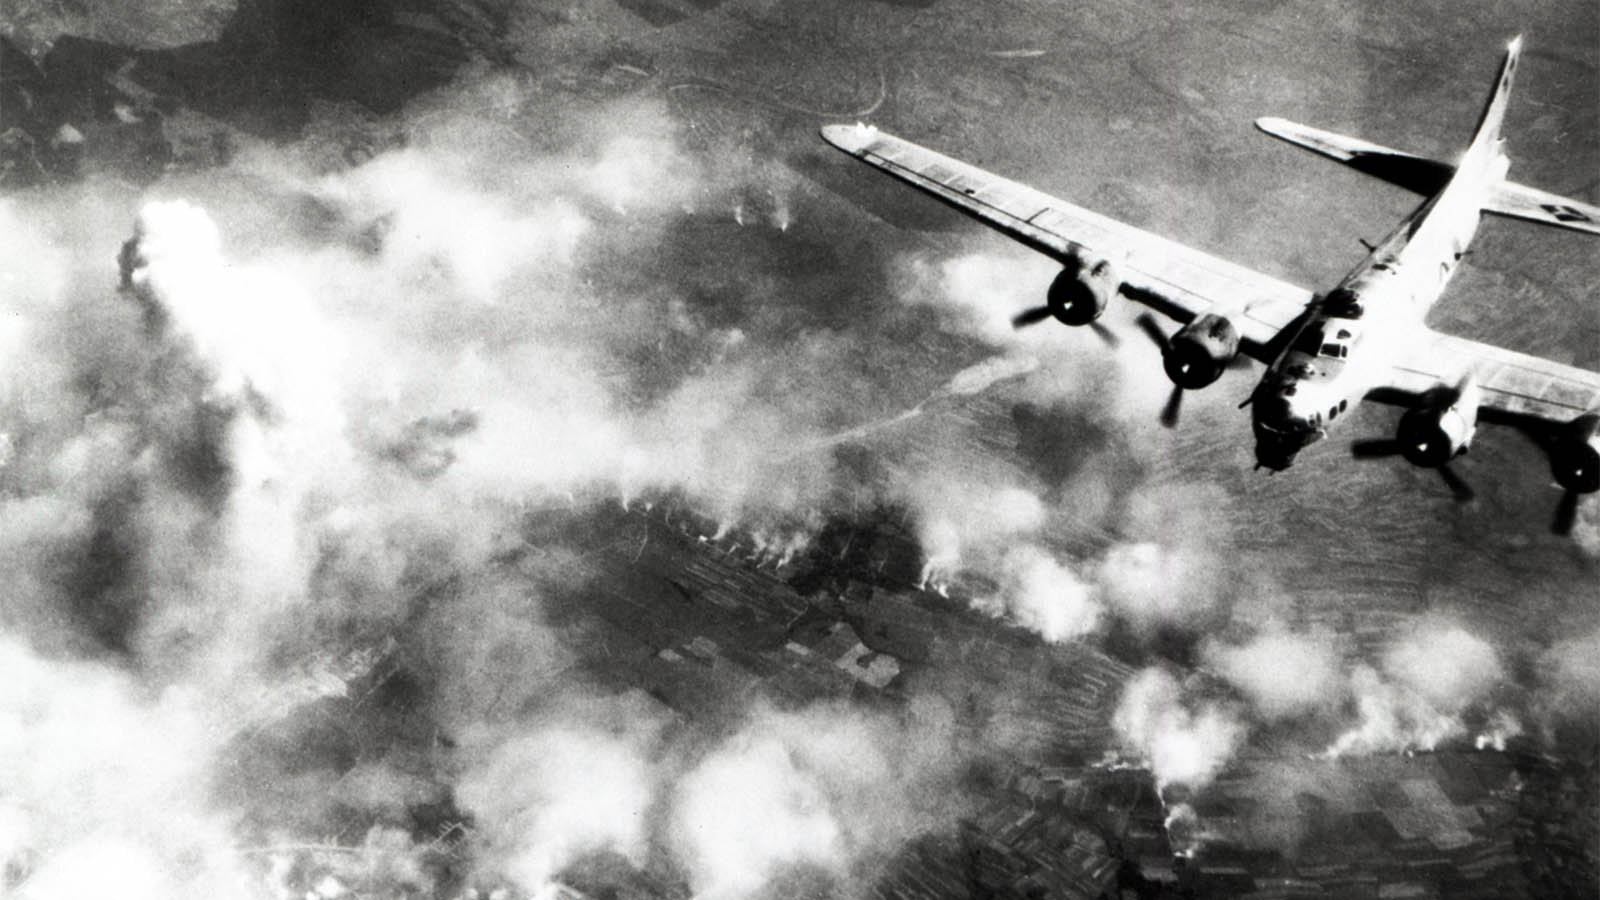 One of the four Allied air strikes on industrial zones near Auschwitz-Birkenau. Pictured: an American B-17 bomber (photo: Getty Images).